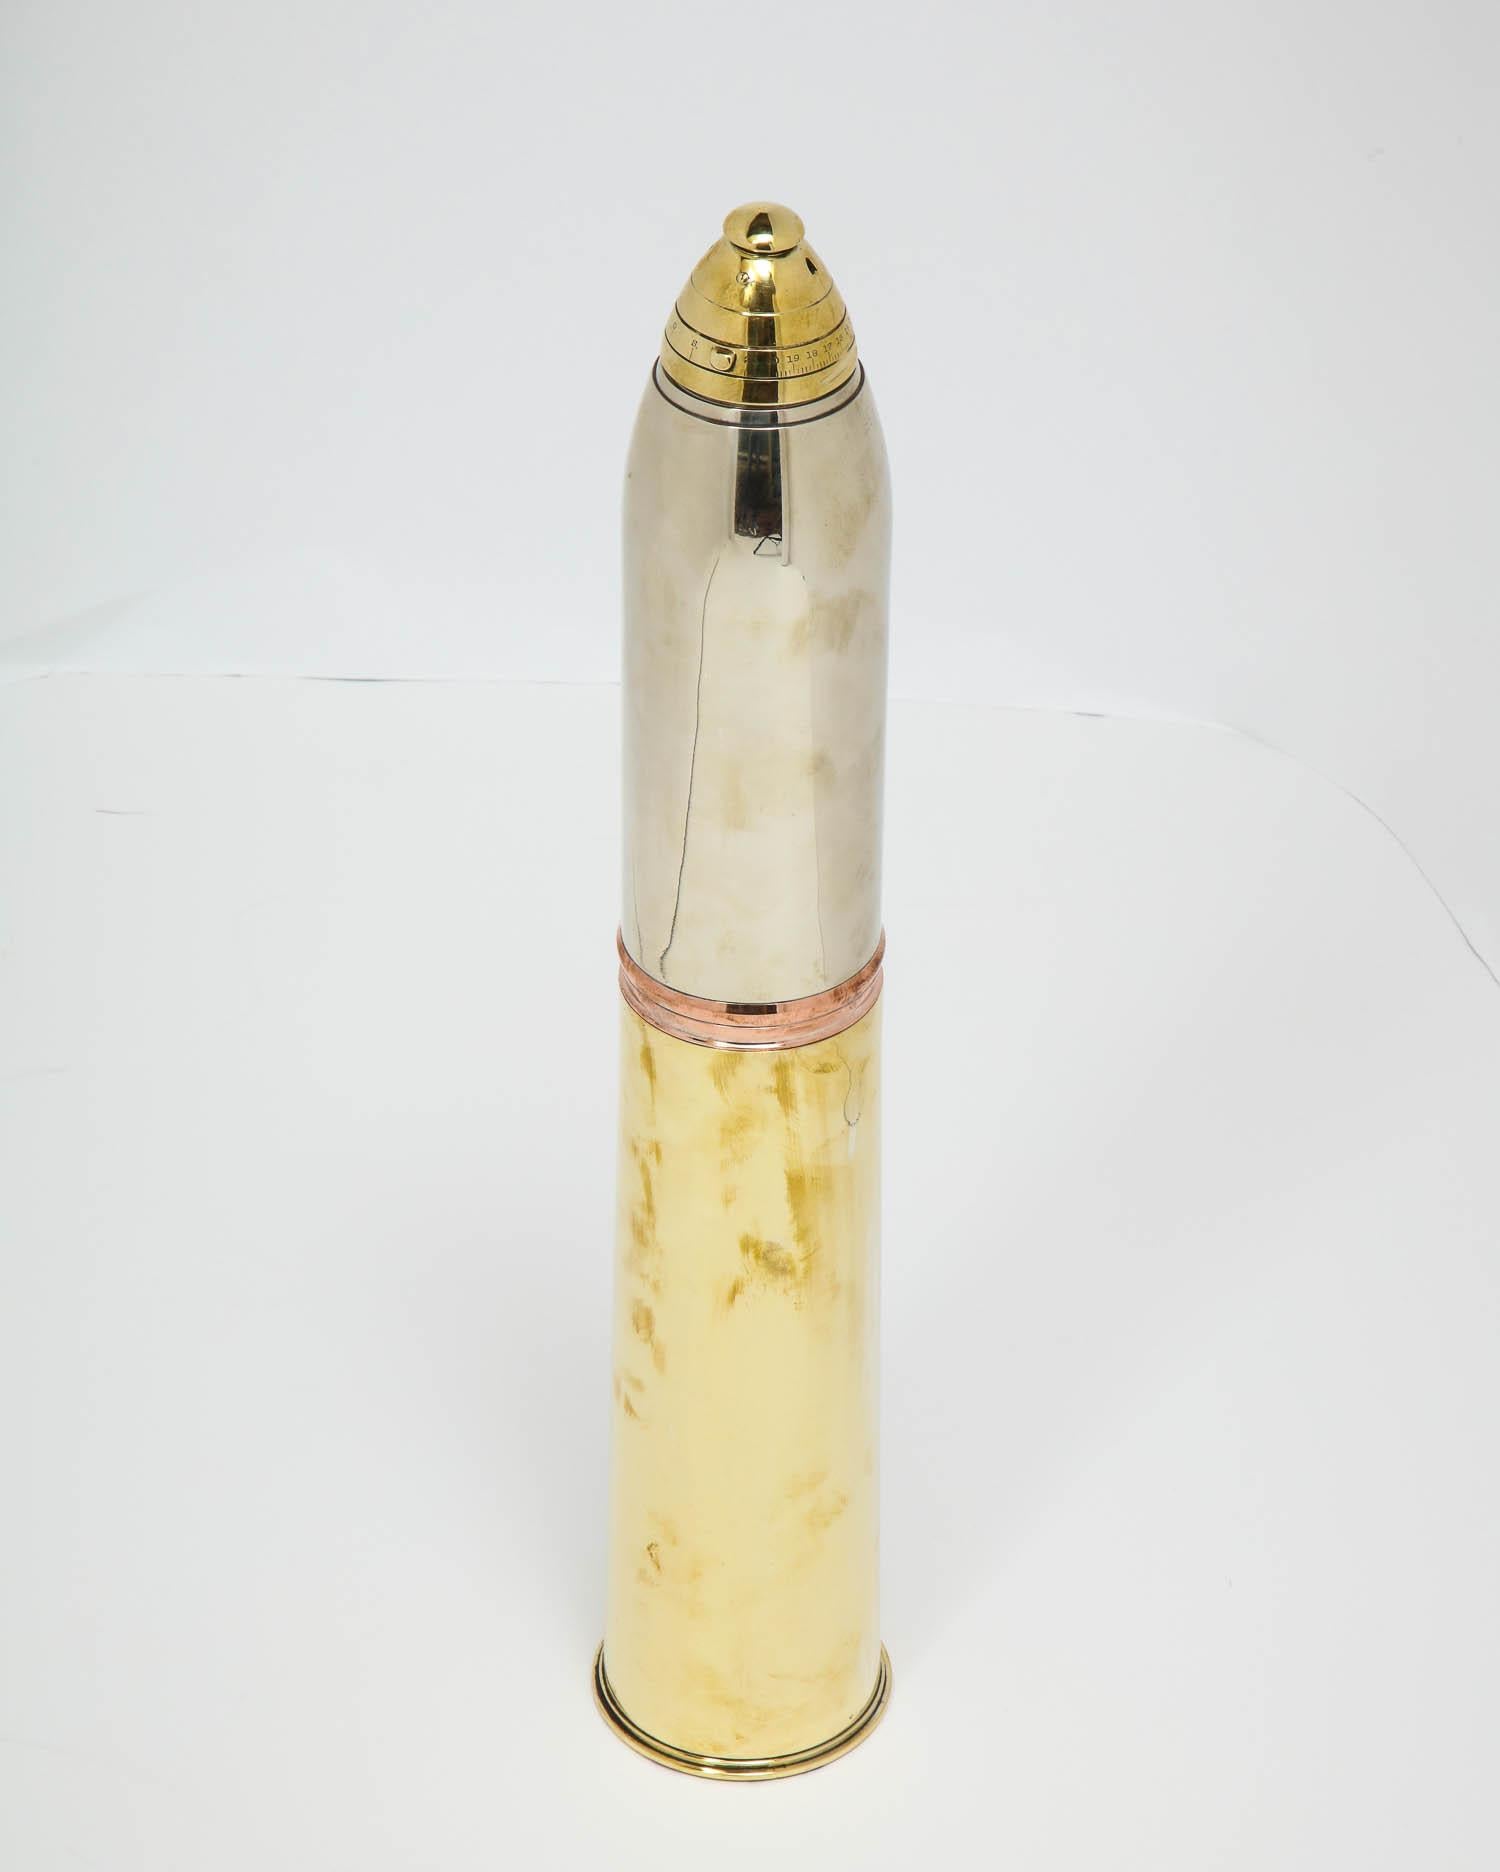 Gorham, a rare artillery shell cocktail shaker, circa 1918

Made by the Gorham Silver Company, with all of its original parts. This shaker is one of the tallest ever produced and, as a drink-making kit, it is a model of efficiency. Very tall and